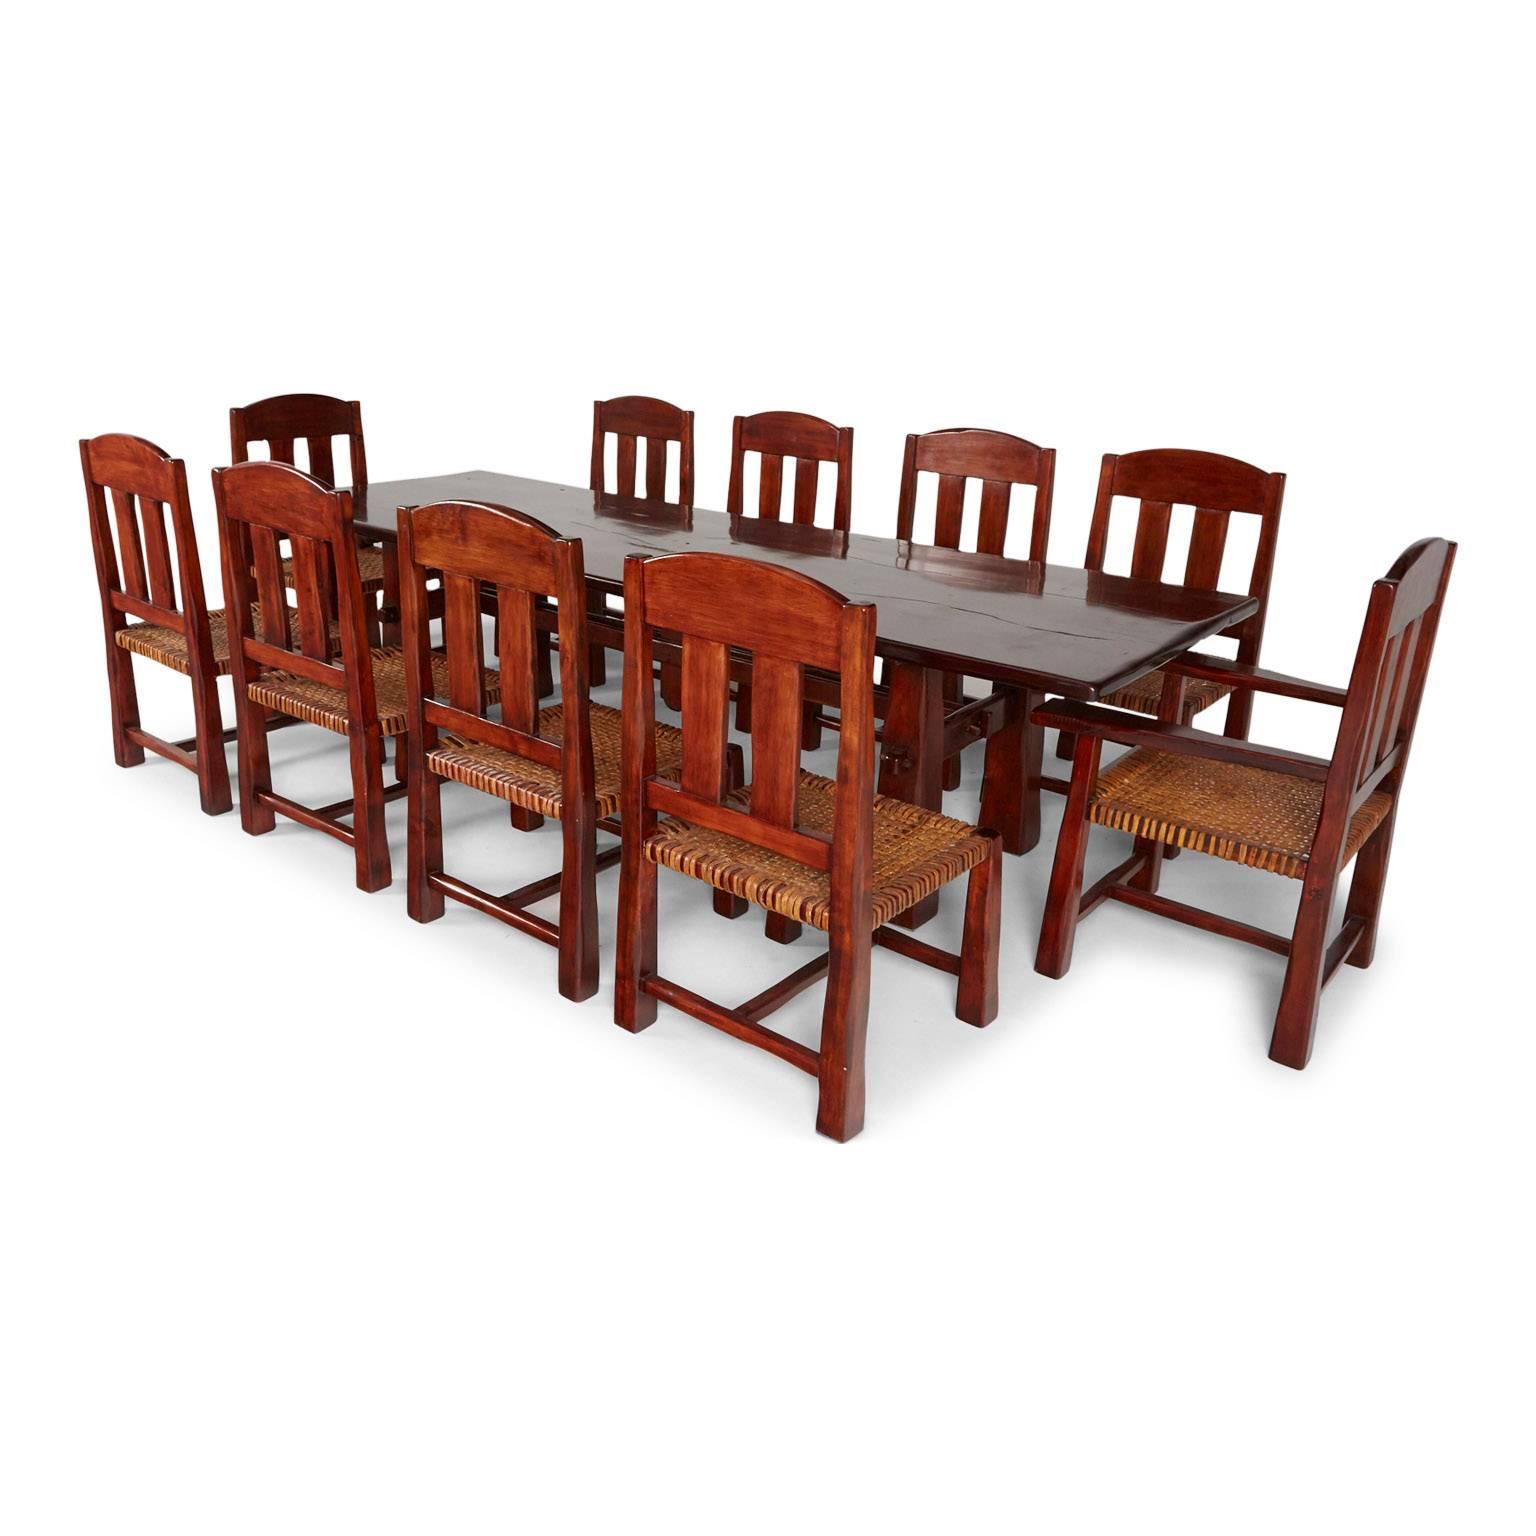 Expansive, great proportioned three plank trestle table and ten chairs made from Algarrobo wood from Argentina, designed by Larry Pearson and Ricardo Paz for Arte Etnico. This set was featured in the book "Rustic Home" by Ralph Kylloe,